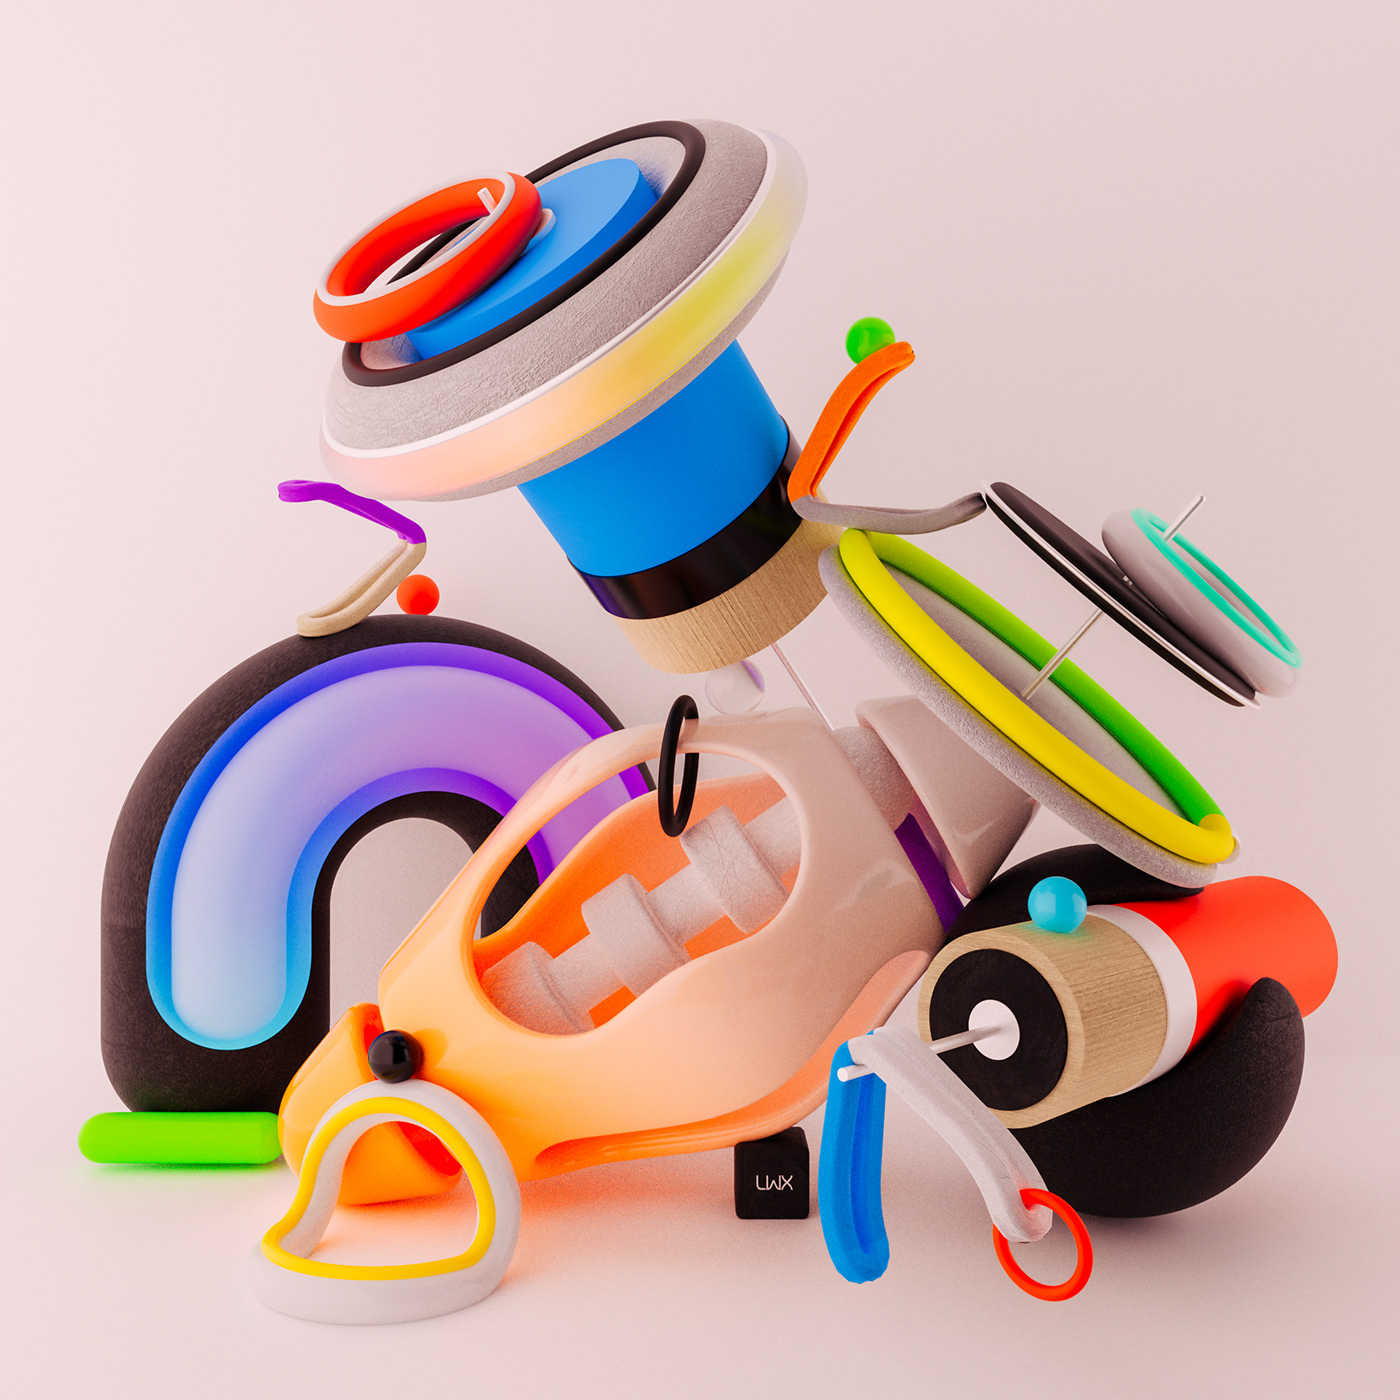 3d design 3Dillustration 3DType Abstract Art colorful happy lettering Modern Design textures vibrant